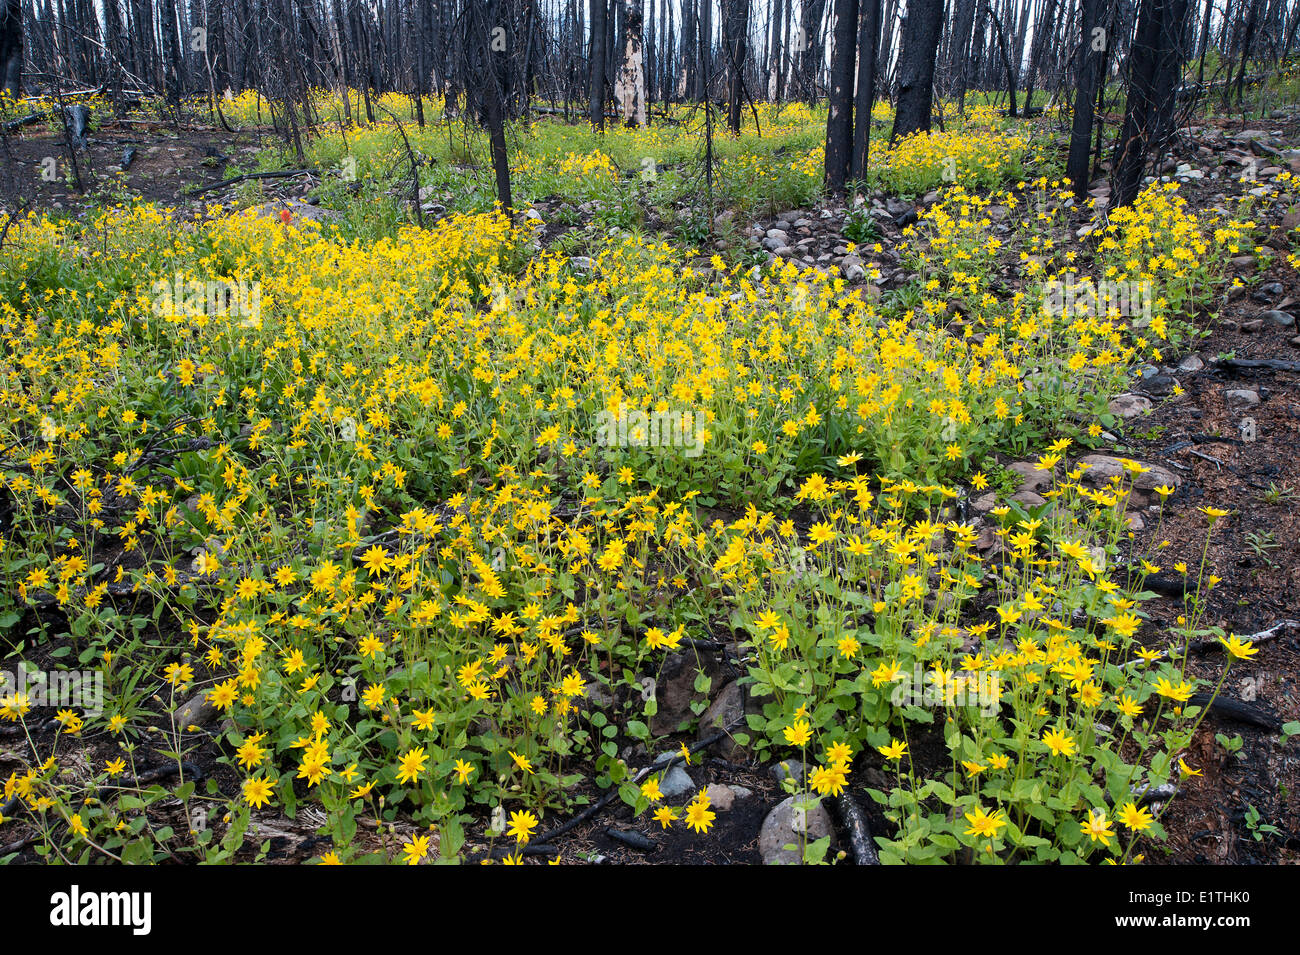 heartleaved arnica Arnica cordifolia regrowth one year after a stand-destroying forest fire in subalpine forest Engelmann Stock Photo